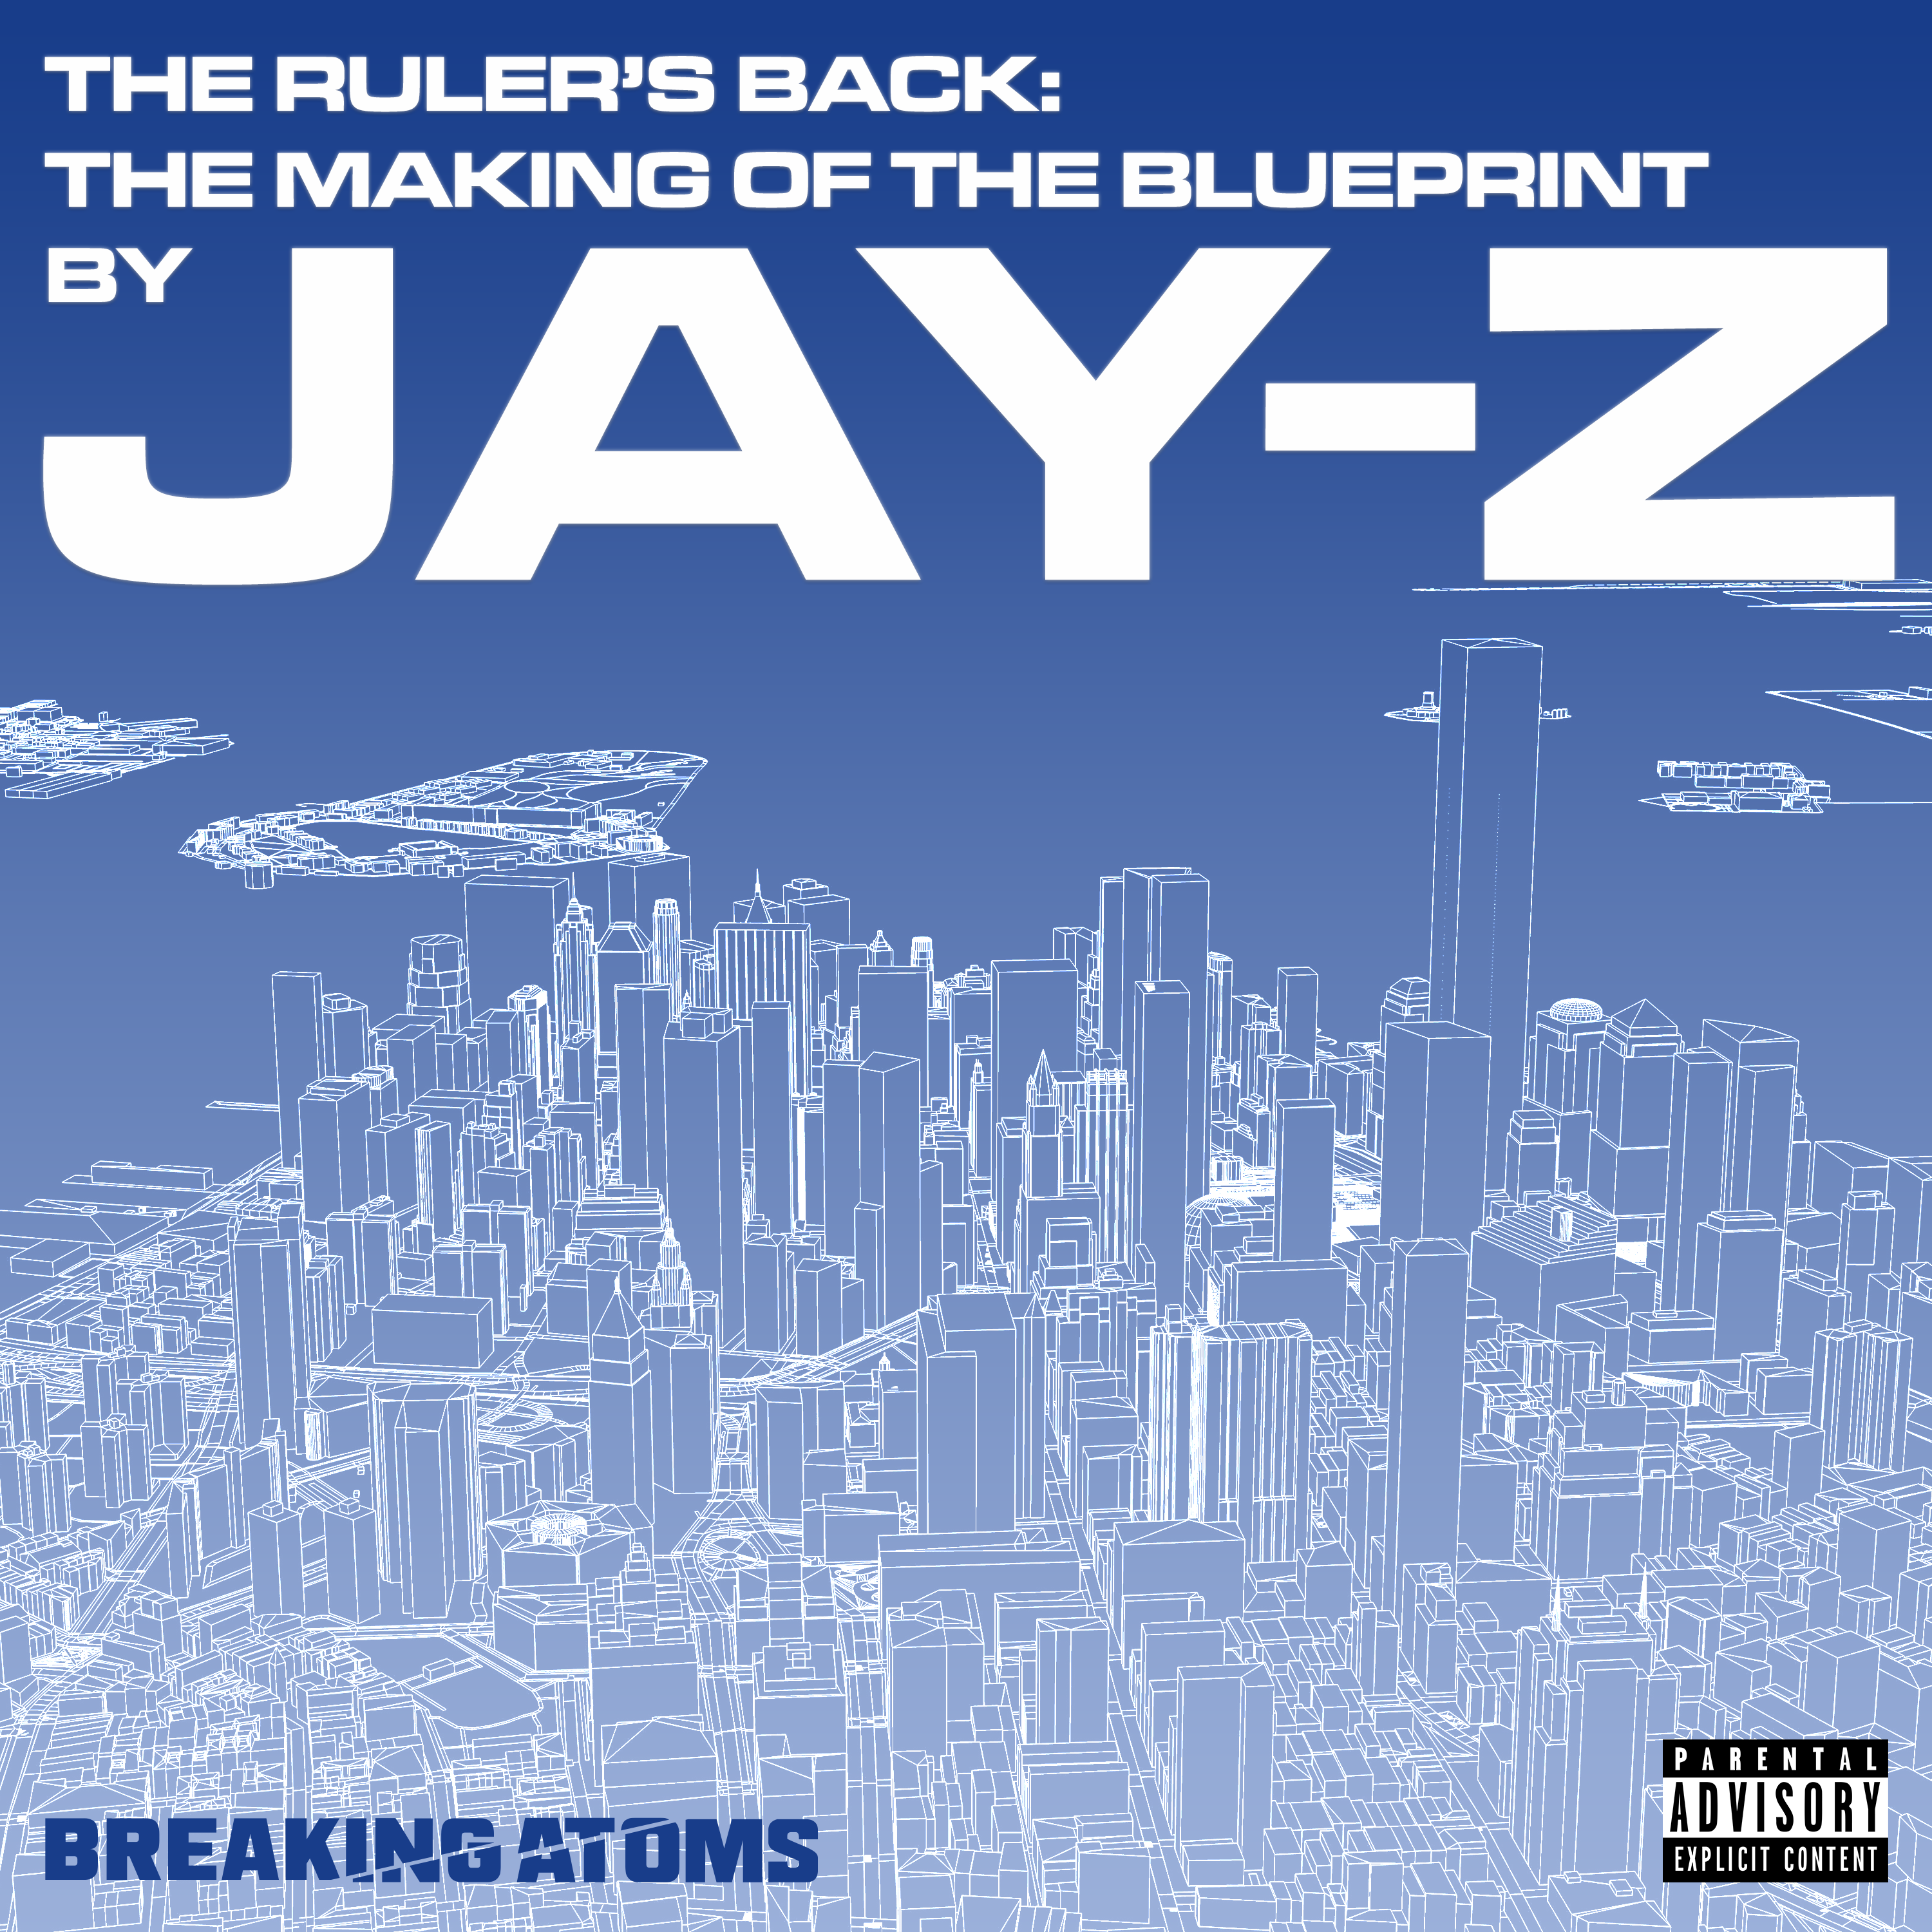 Ep. 2: Takeover | The Ruler’s Back: The Making of The Blueprint by Jay-Z